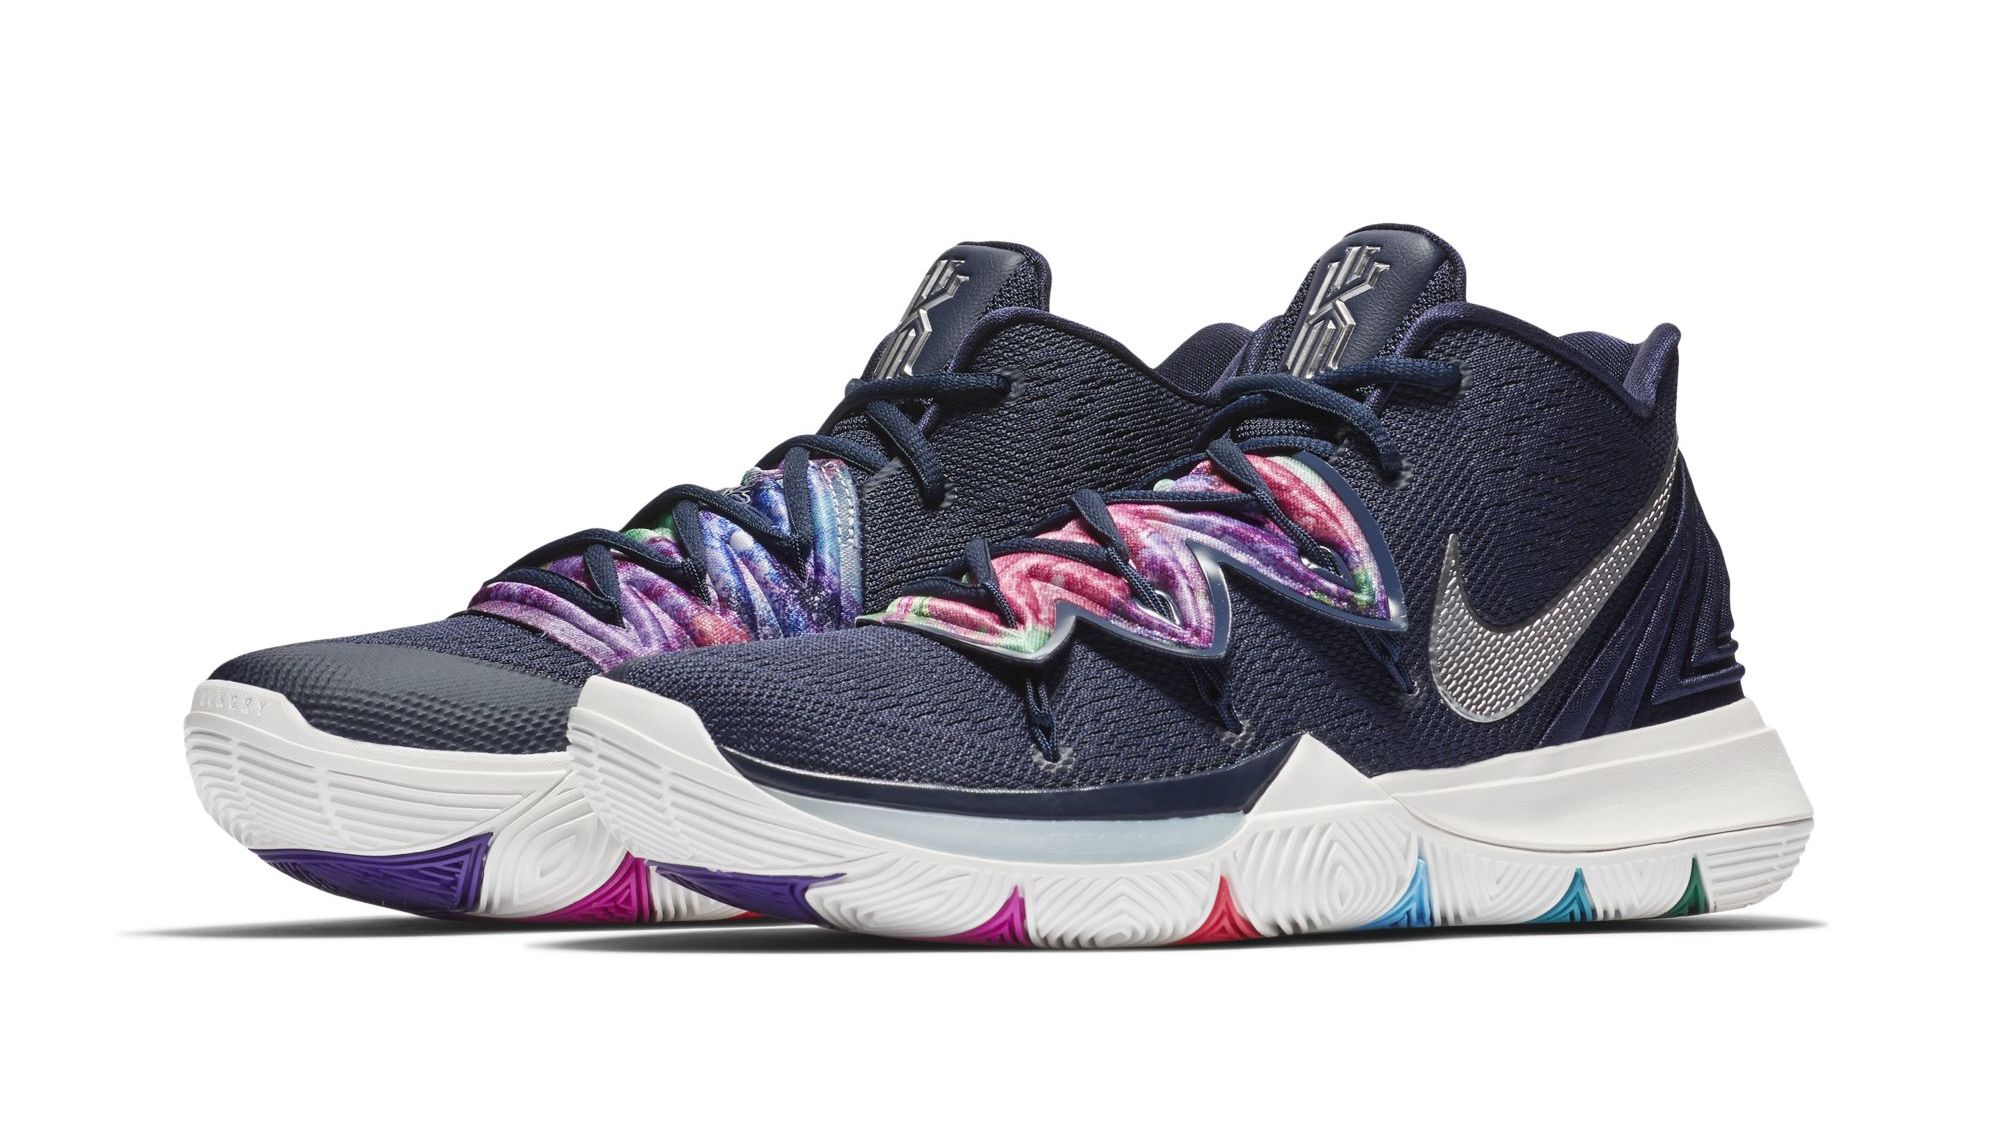 release date for kyrie 5